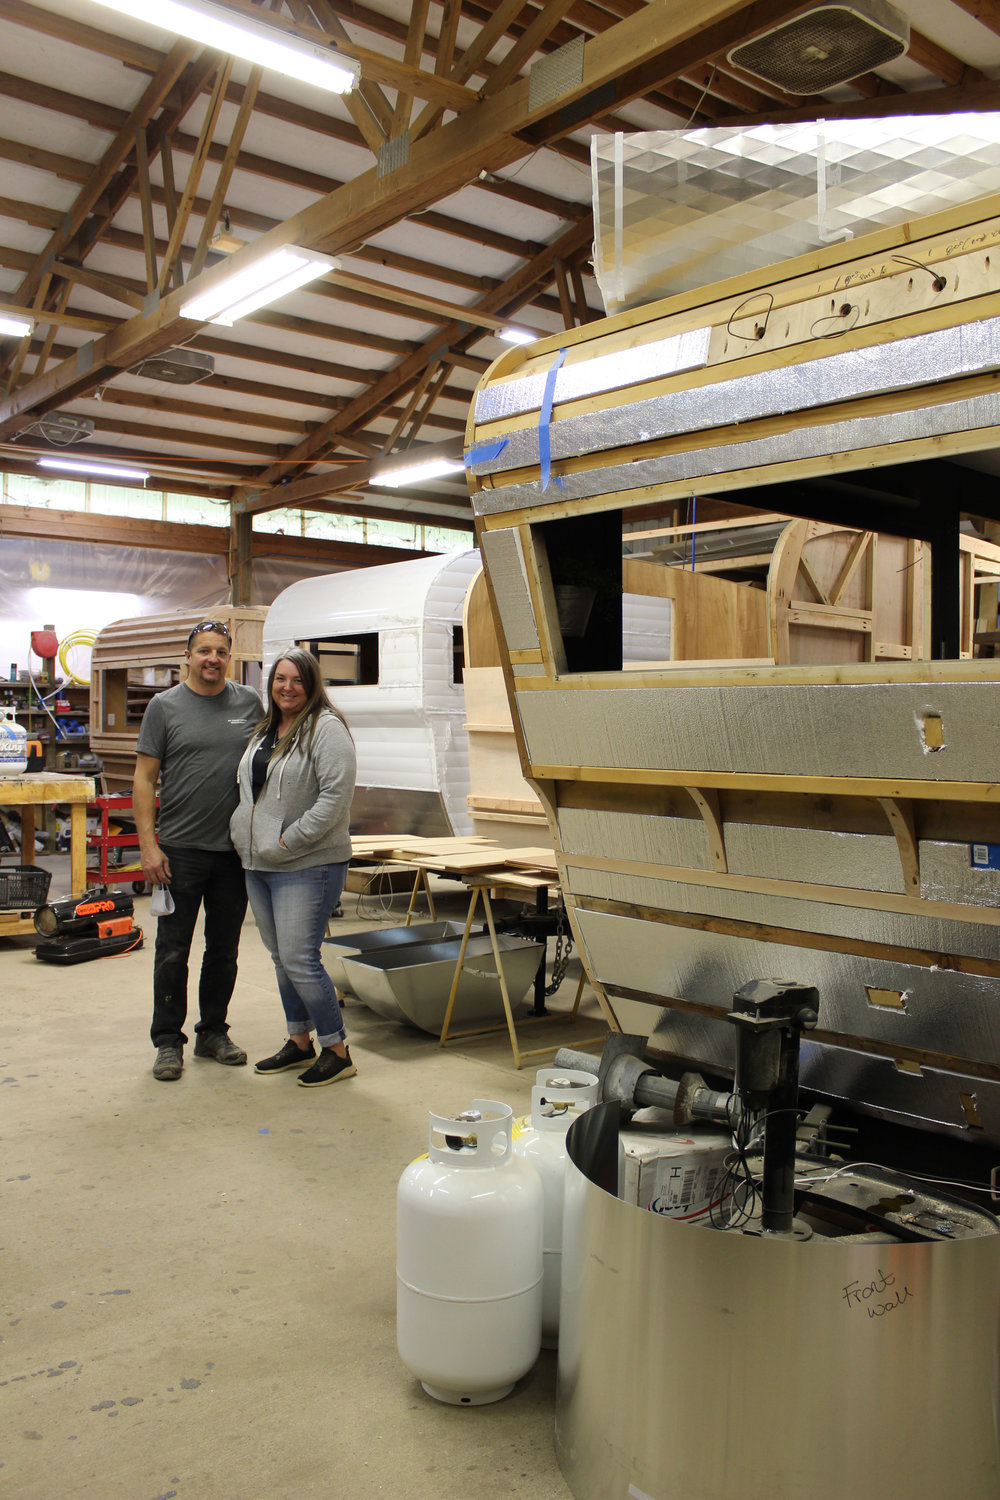 Down River Vintage Trailer Restoration owners Jeremy and Rene Ralston in their Winlock area workshop, along with their four latest vintage trailer projects. The couple said a vintage trailer restoration can take anywhere between 1,500-2,000 man hours.